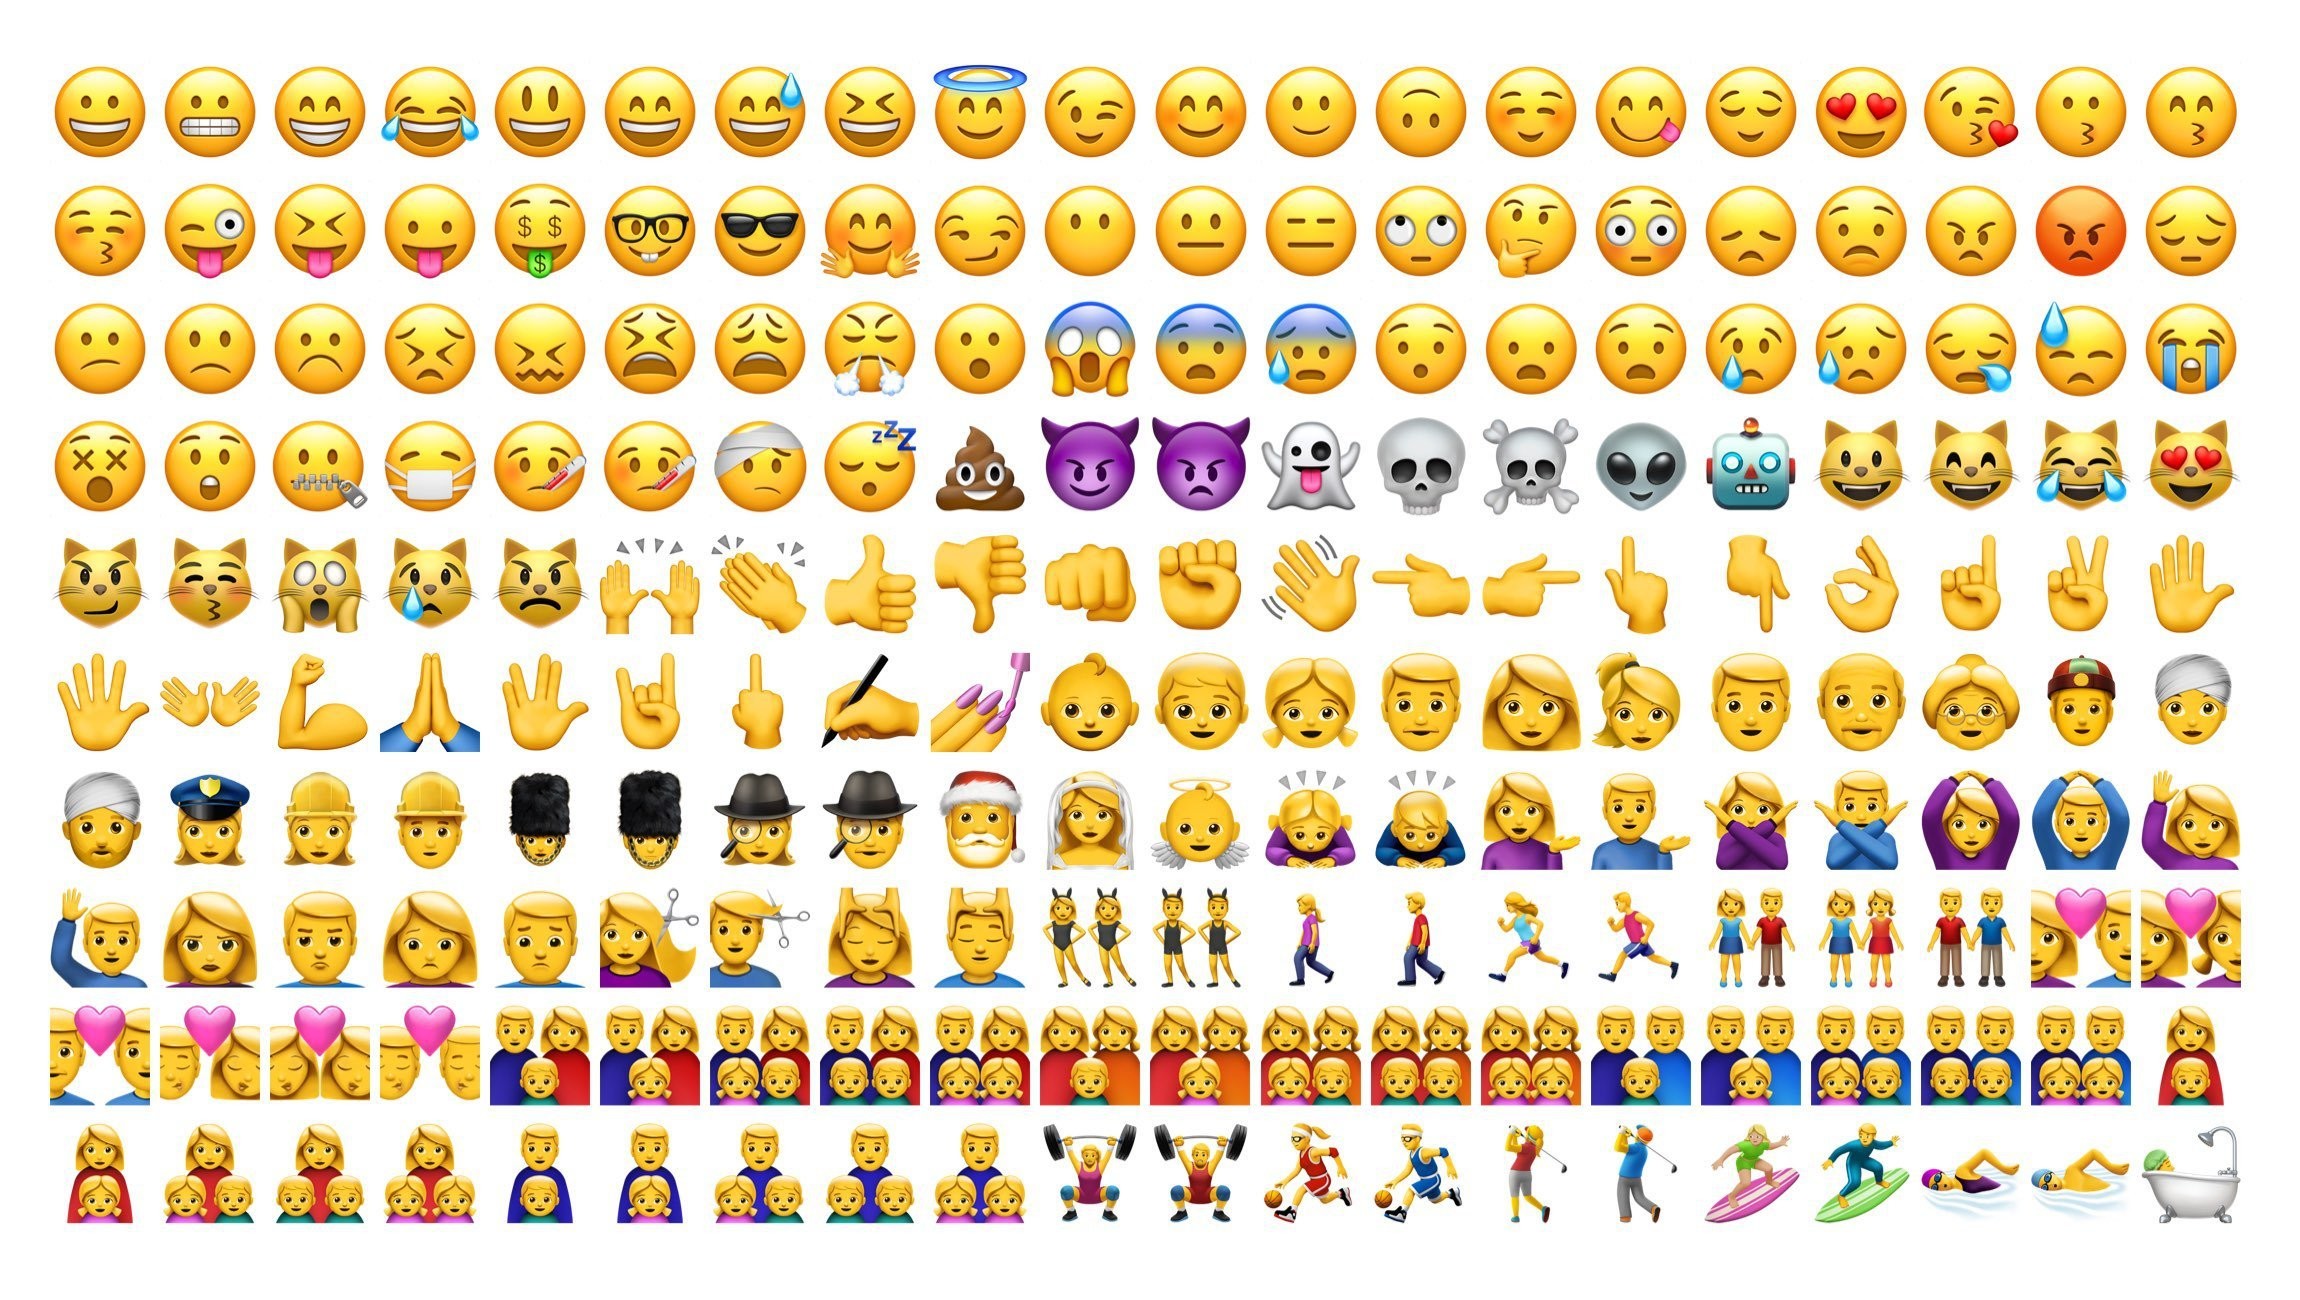 2300x1300 The Poo Emoji Looks Different and Other Important iOS 10 Changes | Inverse